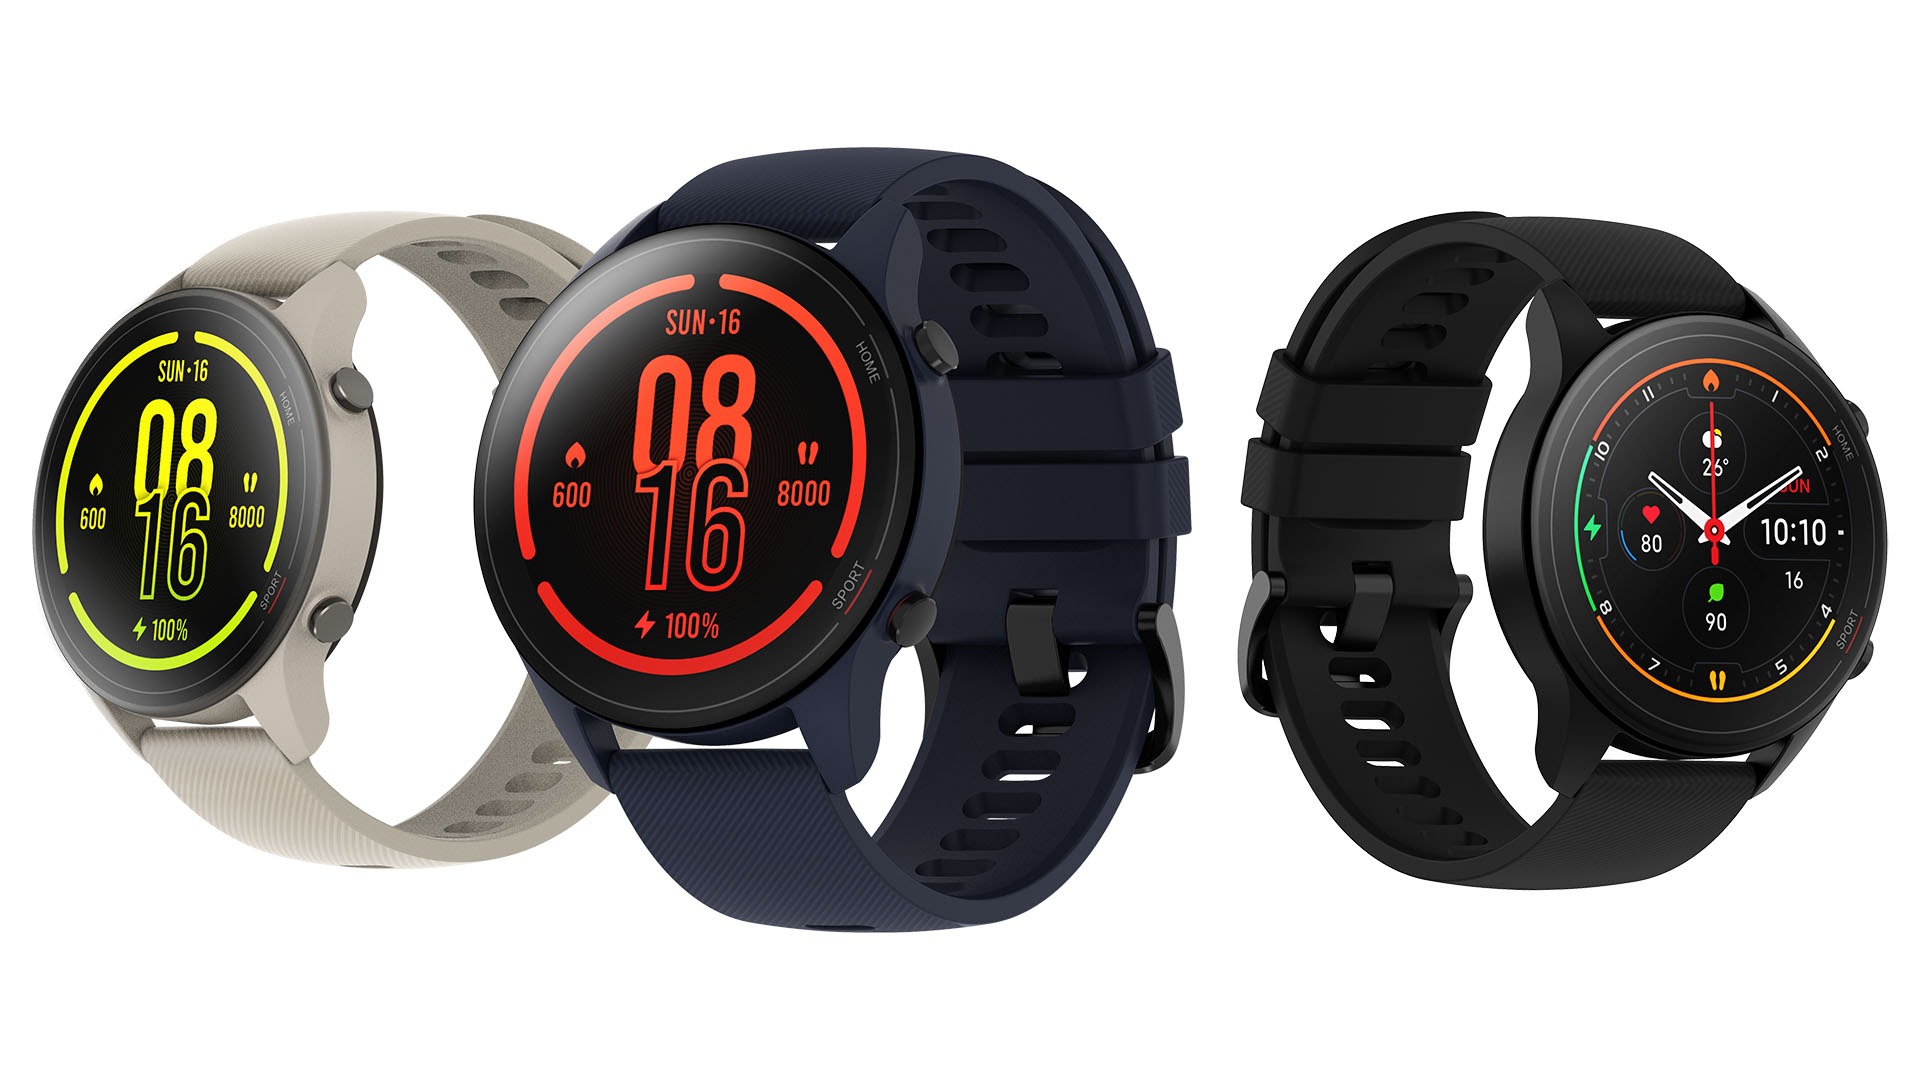 Xiaomi Mi Watch: AMOLED display, 117 sports modes, support for Amazon Alexa, GPS and battery life up to 16 days